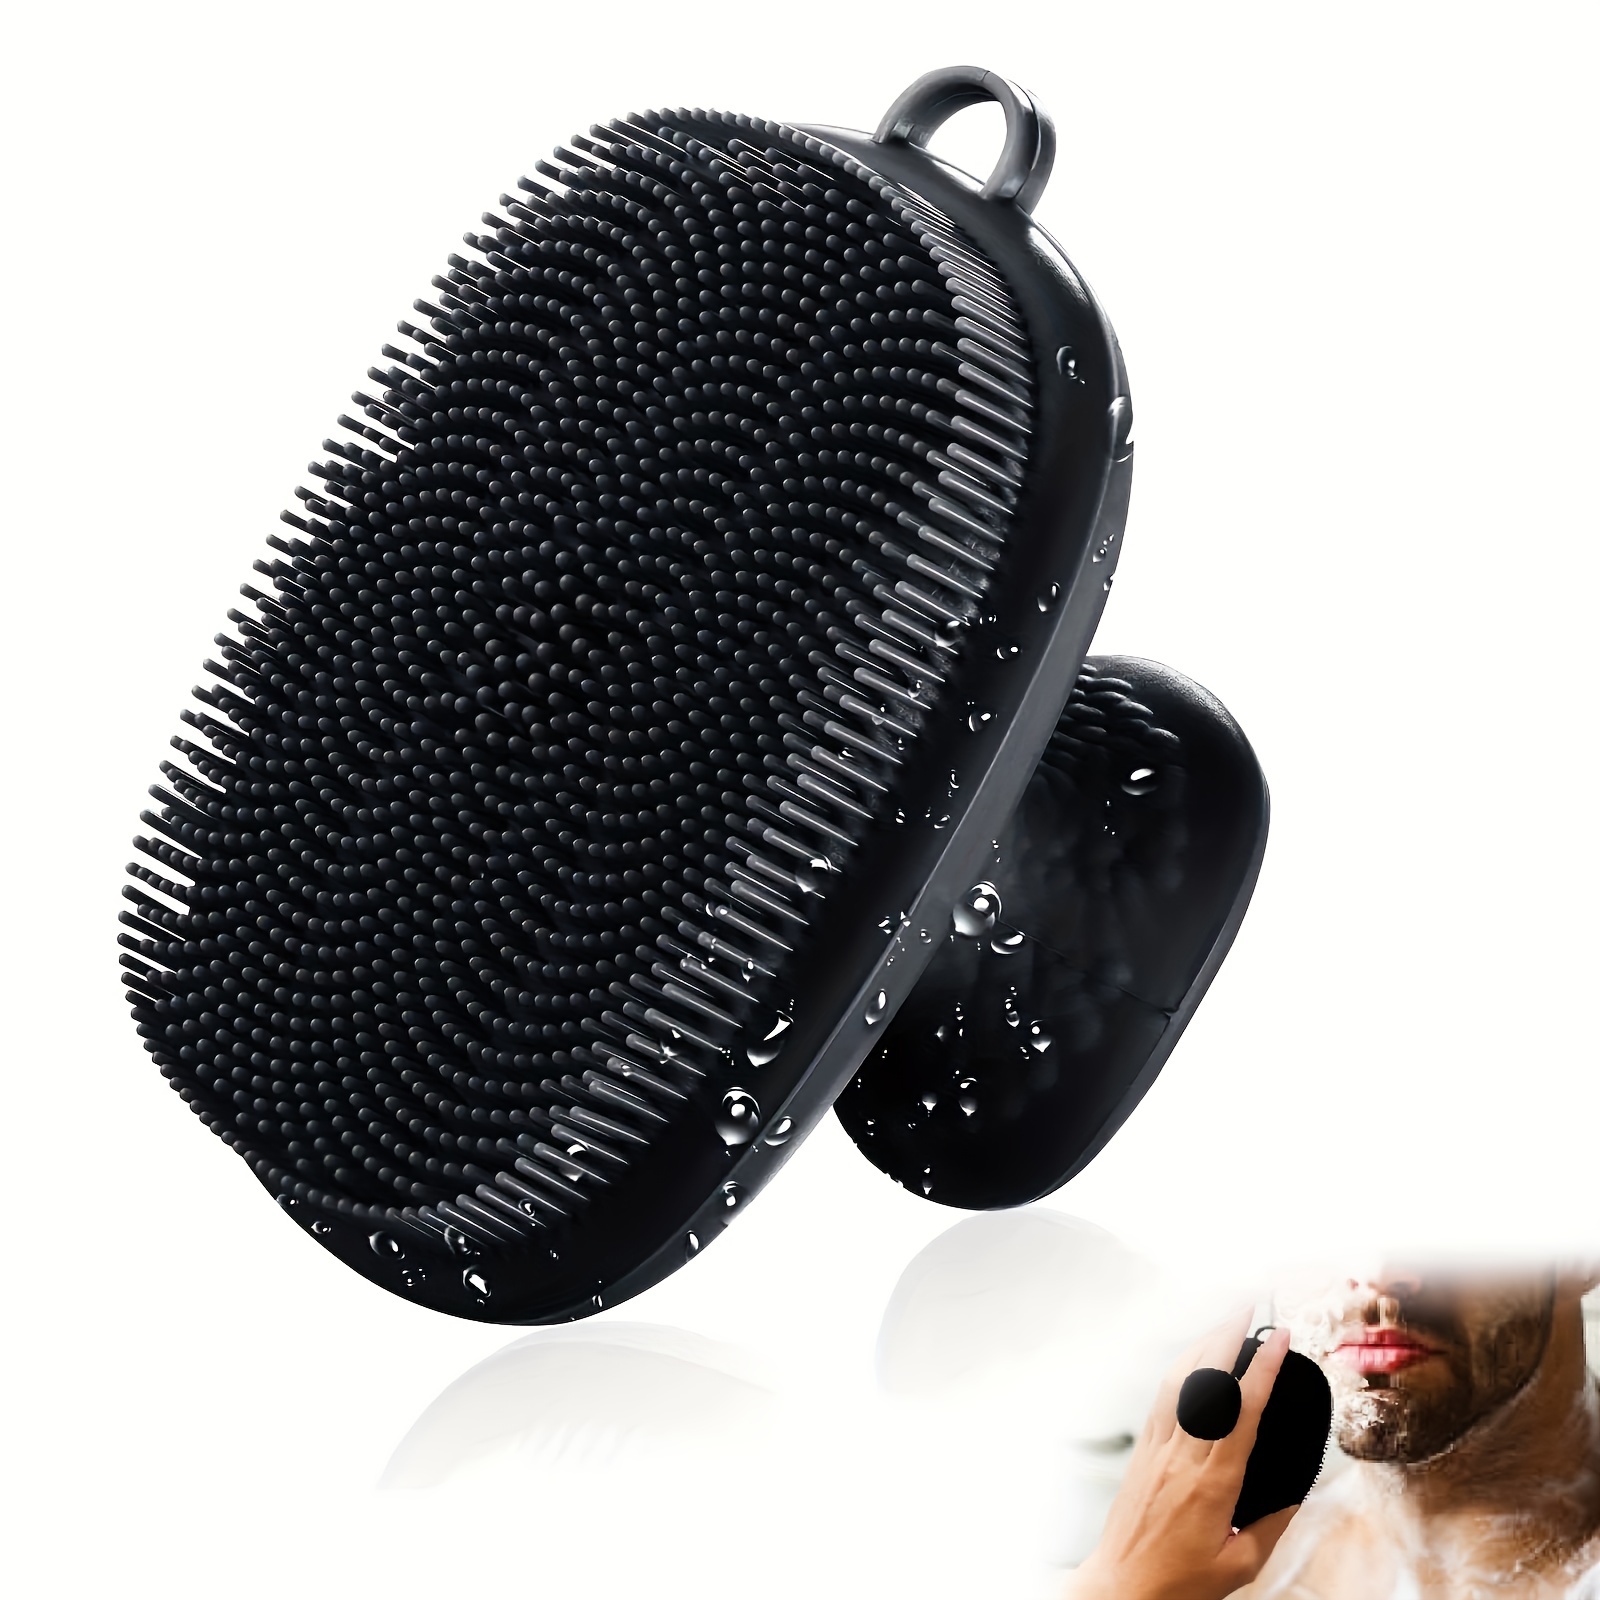 

Silicone Face Scrubber For Men Facial Cleansing, Wash Brush Manual Waterproof Cleansing Skin Care Face Brushes For Cleansing And Exfoliating (black)